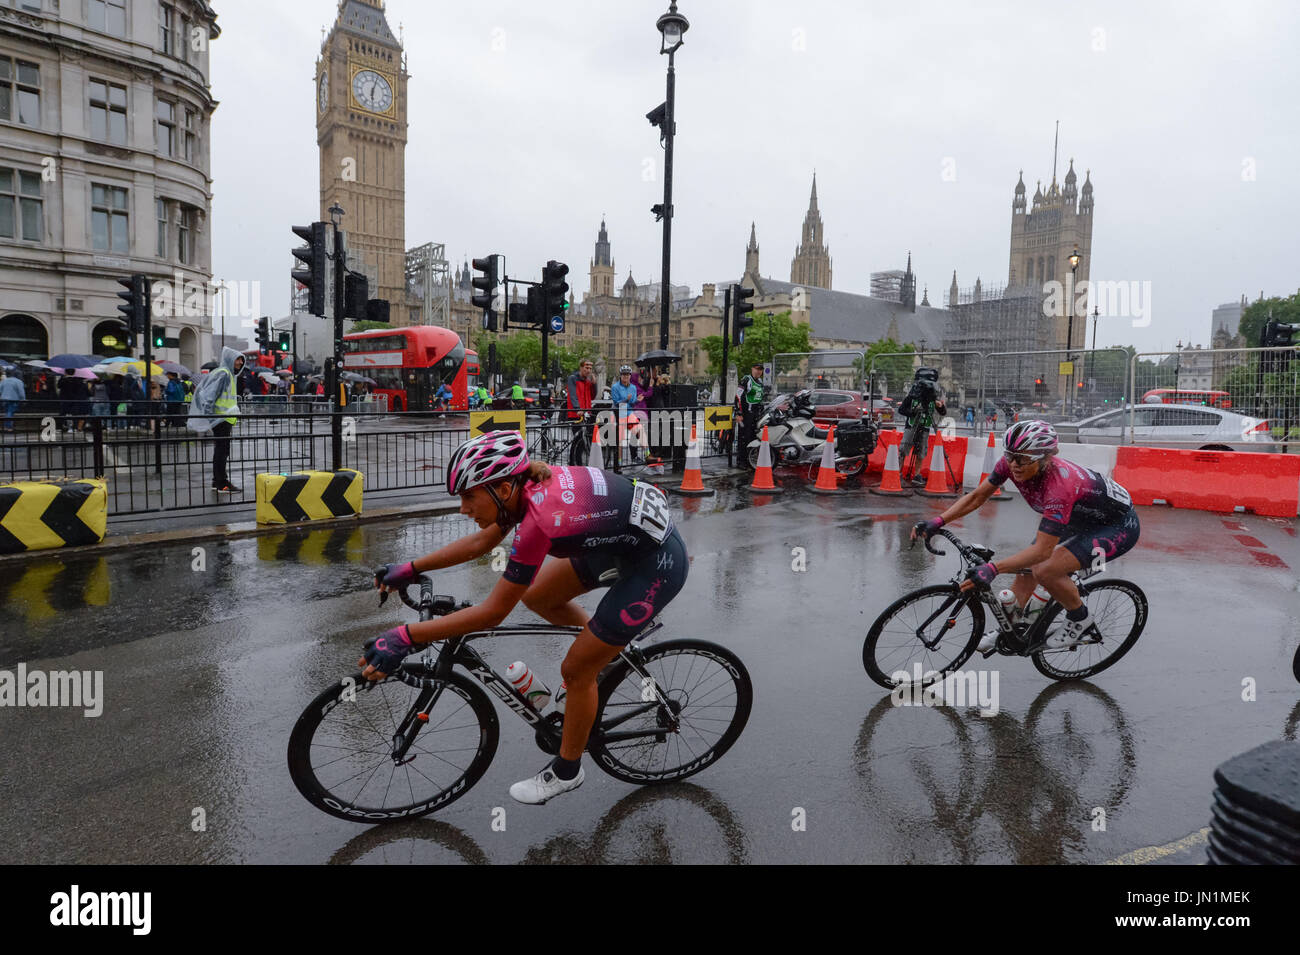 London, UK. 29th July, 2017. The 2017 Prudential RideLondon Classique. The race took place on the streets of London, passing landmarks. Heavy rain fell throughout the race. Andrew Steven Graham/Alamy Live News Stock Photo